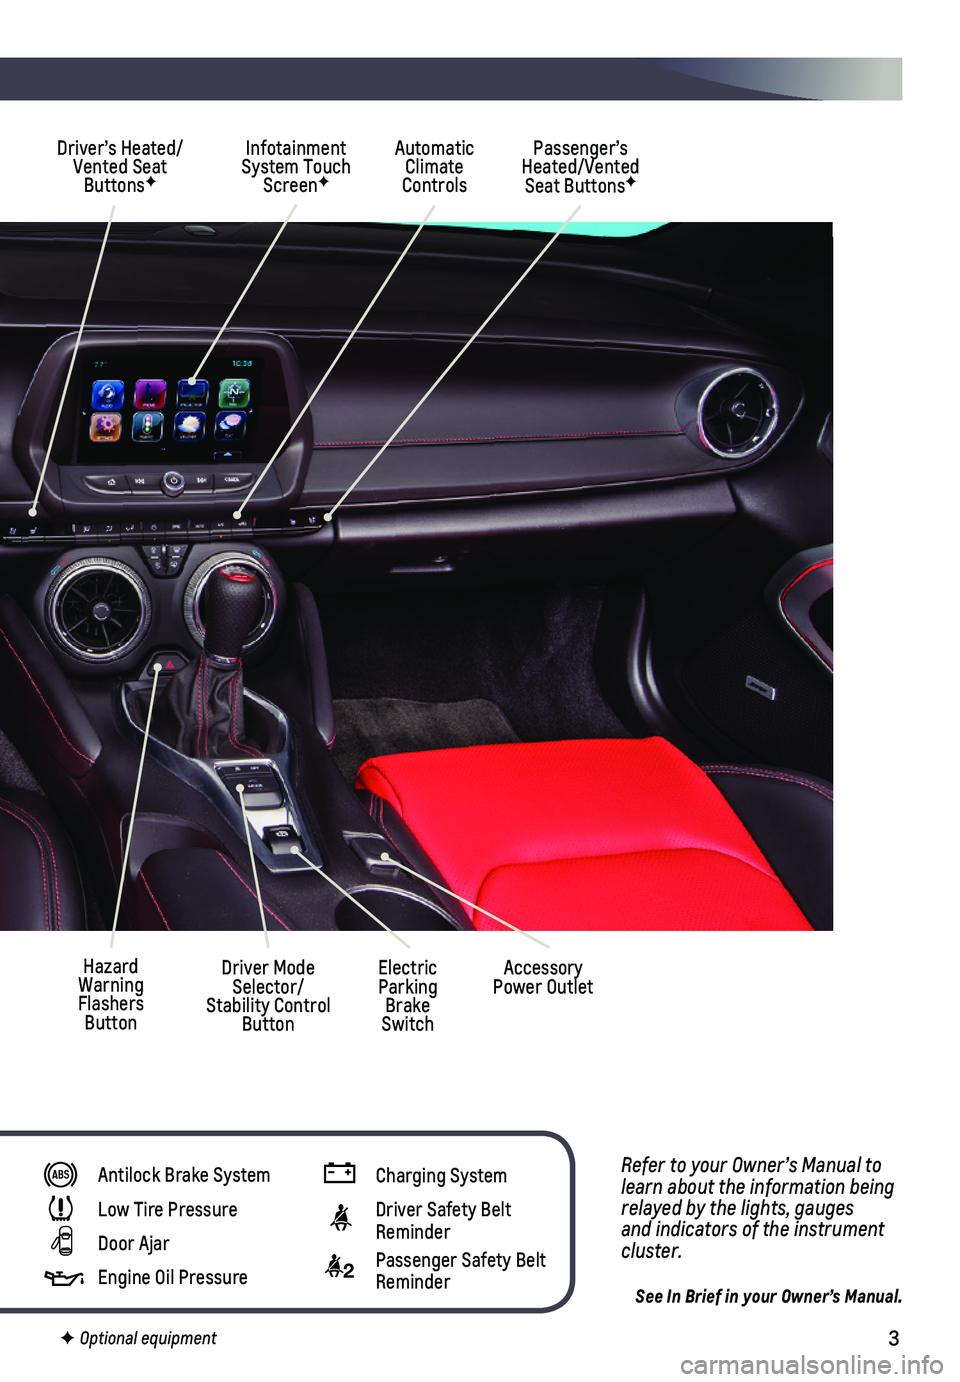 CHEVROLET CAMARO 2018  Get To Know Guide 3
Refer to your Owner’s Manual to learn about the information being relayed by the lights, gauges and indicators of the instrument cluster.
See In Brief in your Owner’s Manual.
Driver’s Heated/V